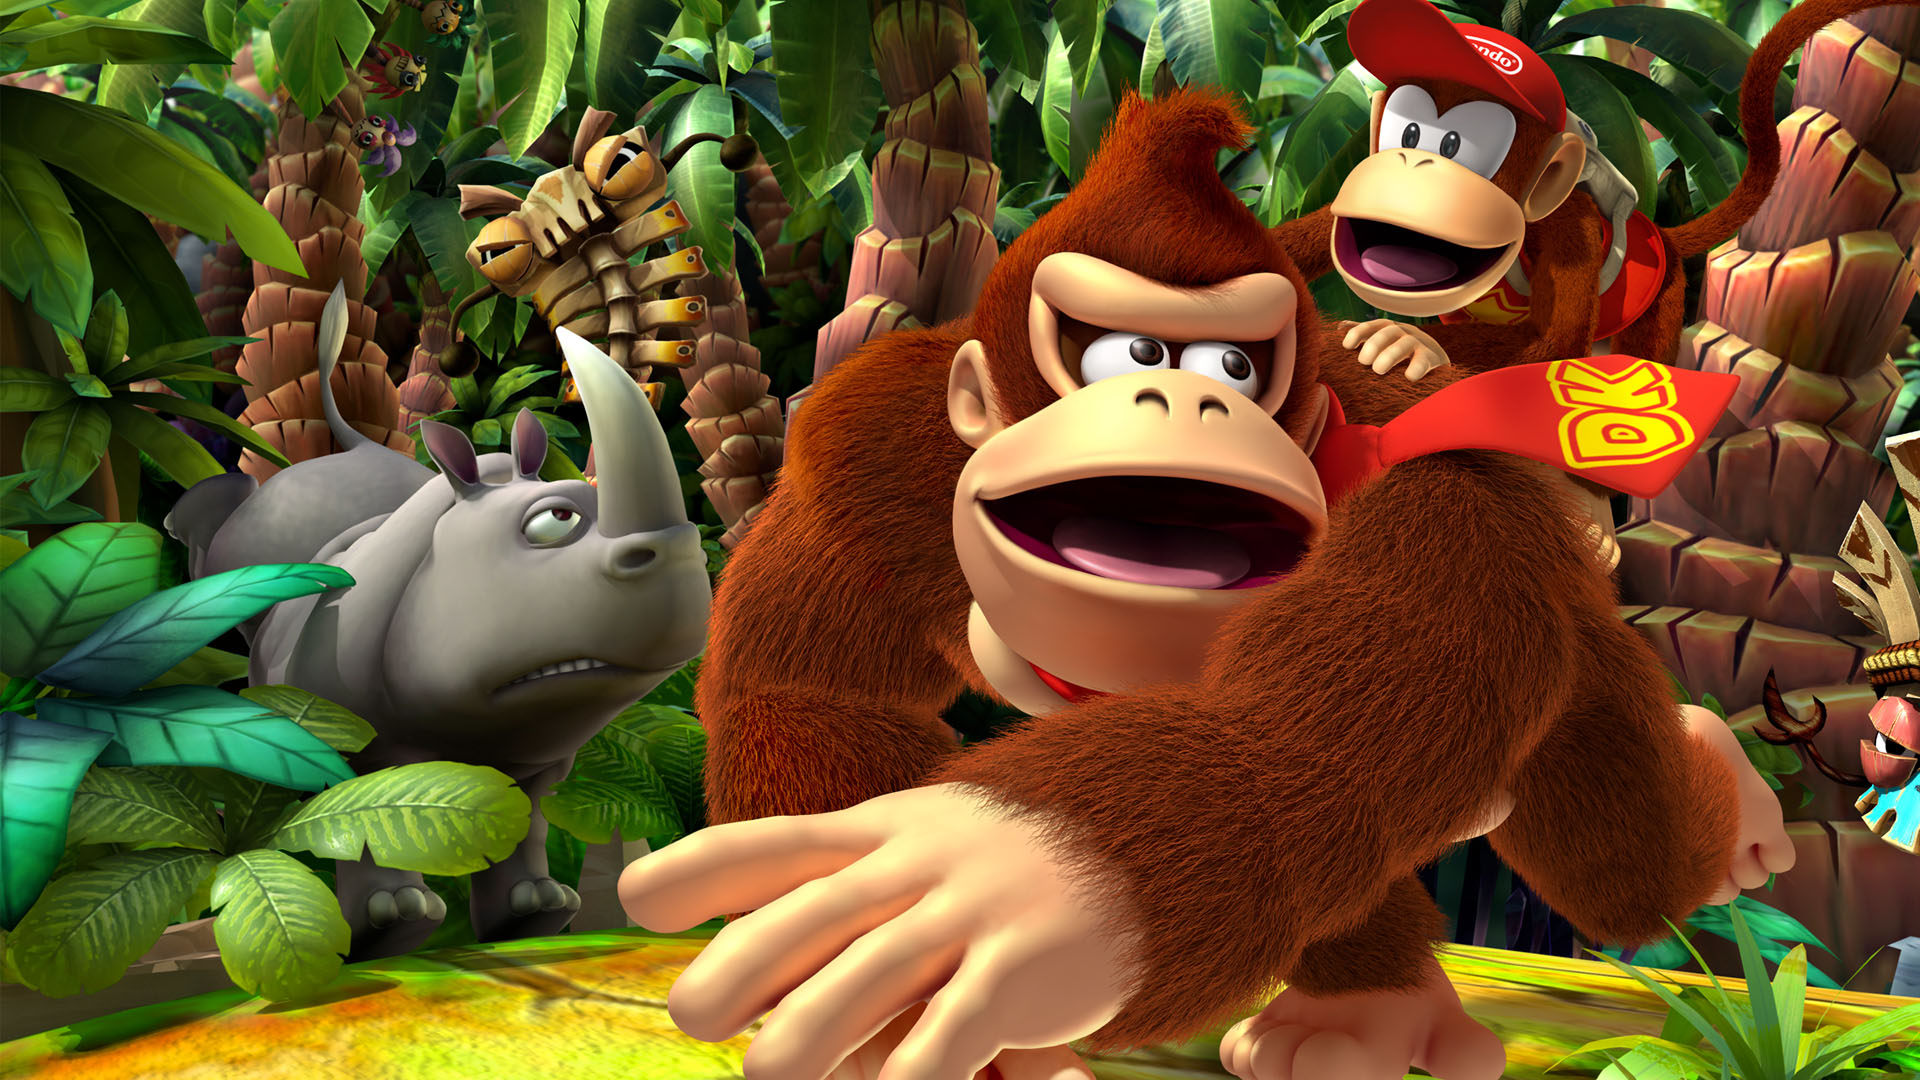 What’s Going on With Donkey Kong.